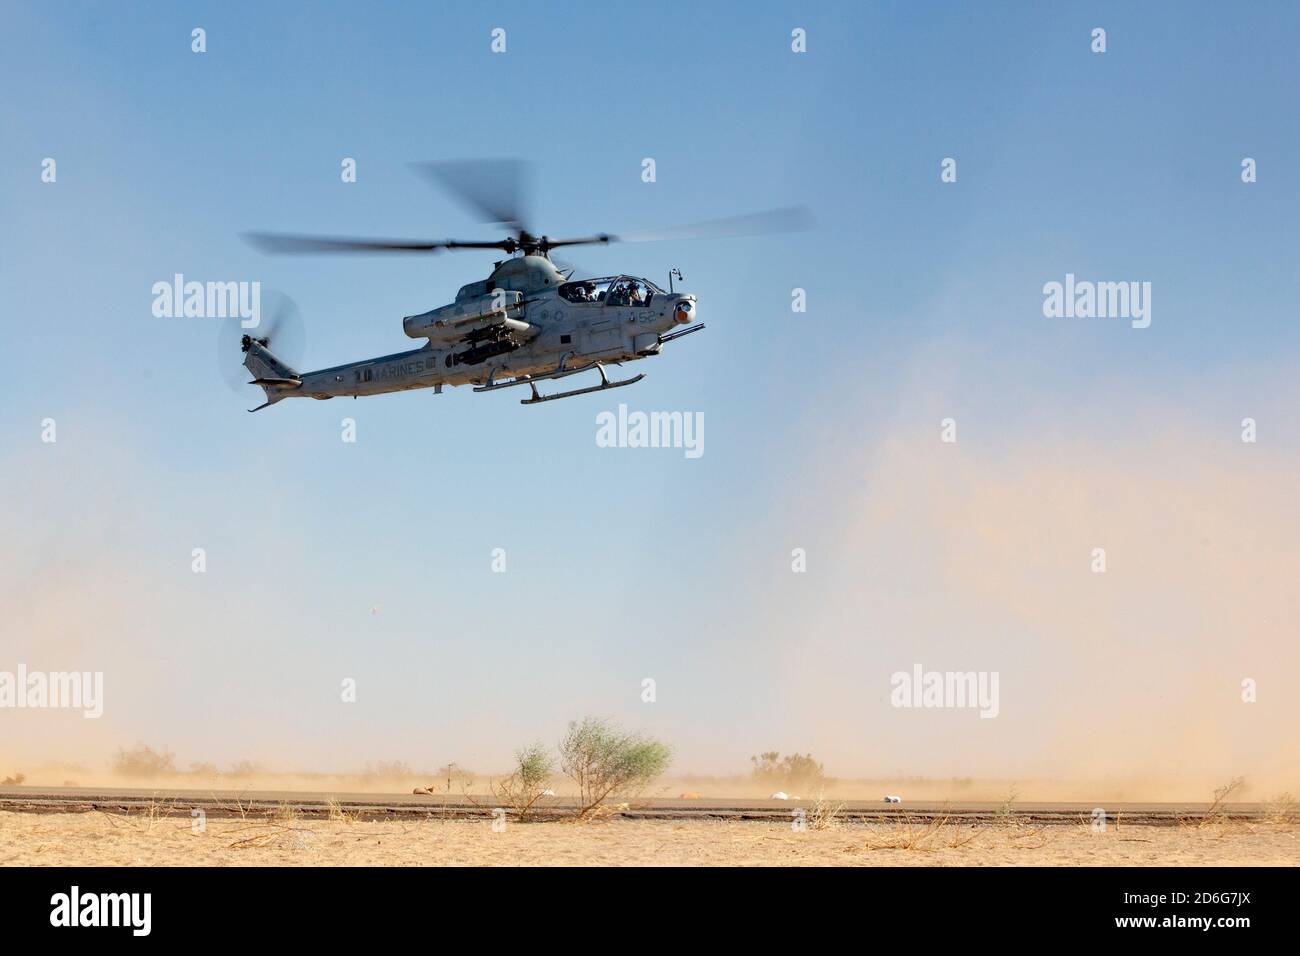 A U.S. Marine Corps AH-1Z Cobra assigned to Marine Aviation Weapons and Tactics Squadron One (MAWTS-1), participating in Weapons and Tactics Instructor (WTI) course 1-21, takes-off from a forward arming and refueling point at Auxiliary Airfield II, in Yuma, Arizona, Oct. 12, 2020. The WTI course is a seven-week training event hosted by MAWTS-1, providing standardized advanced tactical training and certification of unit instructor qualifications to support Marine aviation training and readiness, and assists in developing and employing aviation weapons and tactics. (U.S. Marine Corps photo by Cp Stock Photo